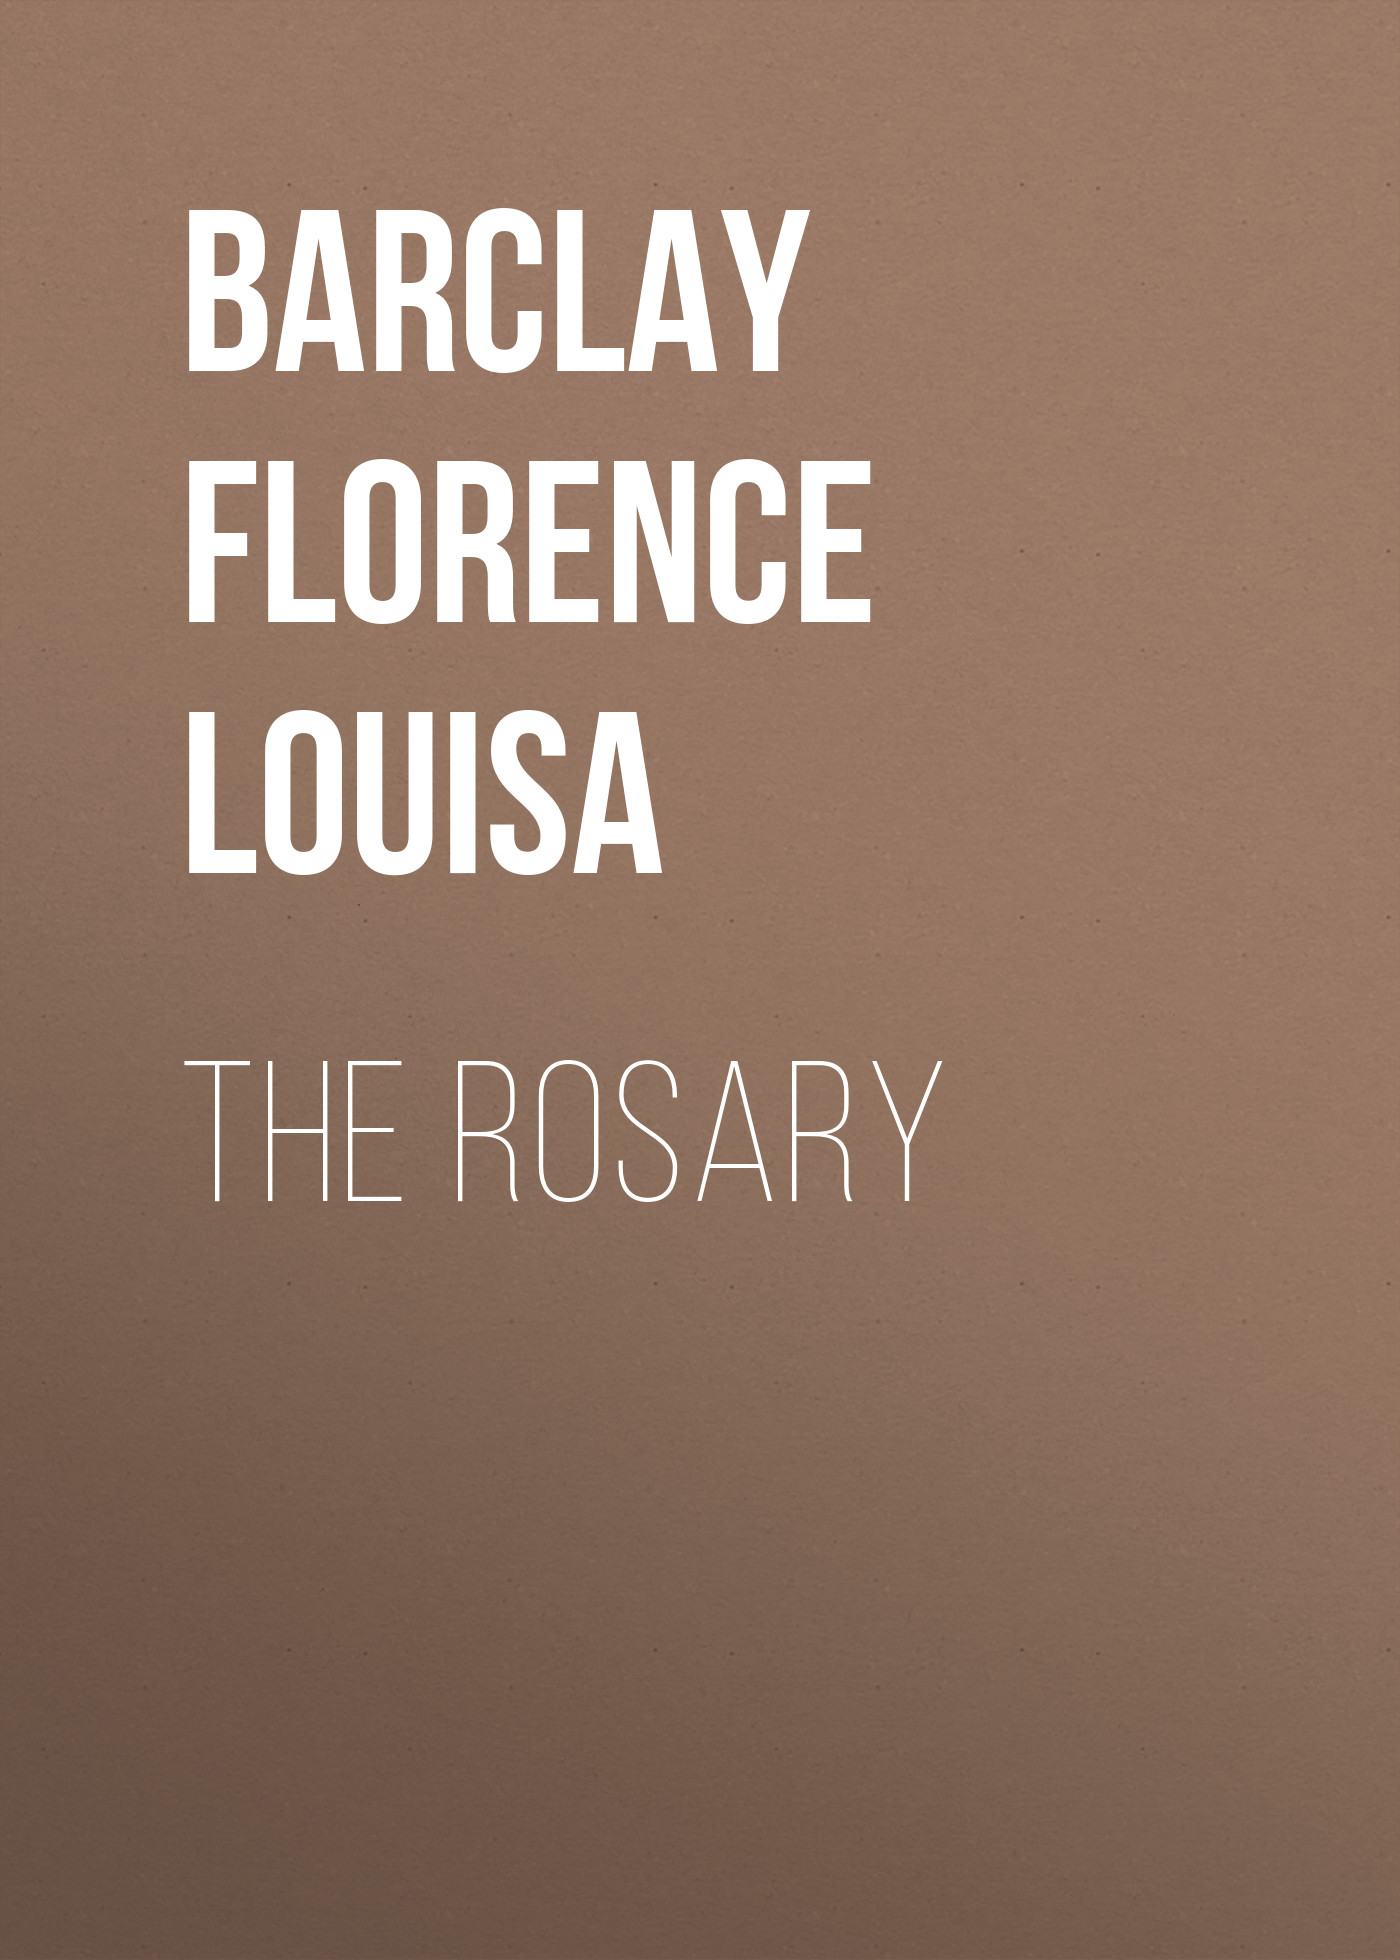 Barclay Florence Louisa The Rosary